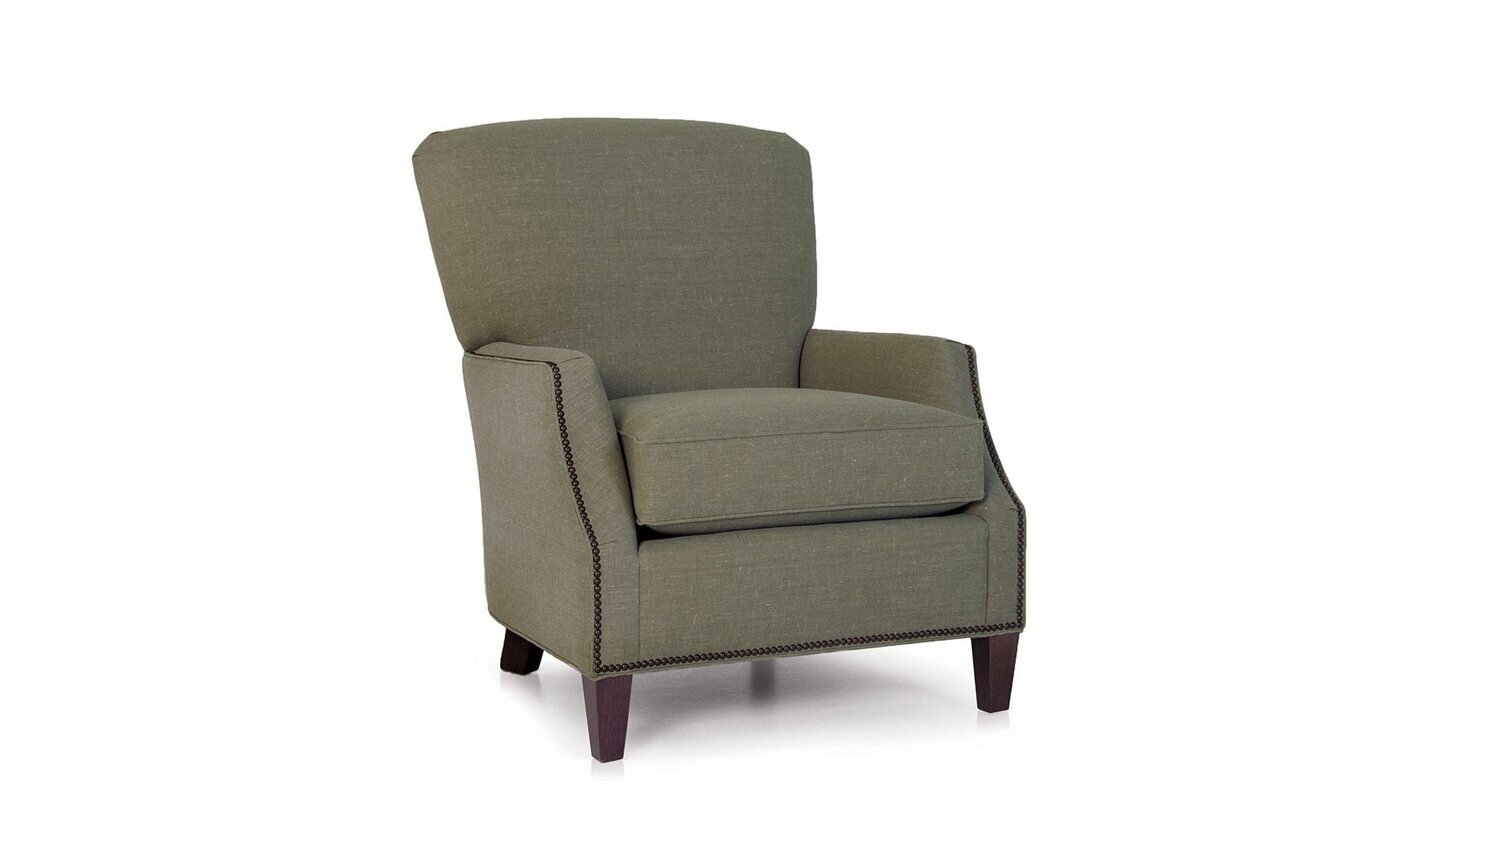 Smith Brothers 529 Chair